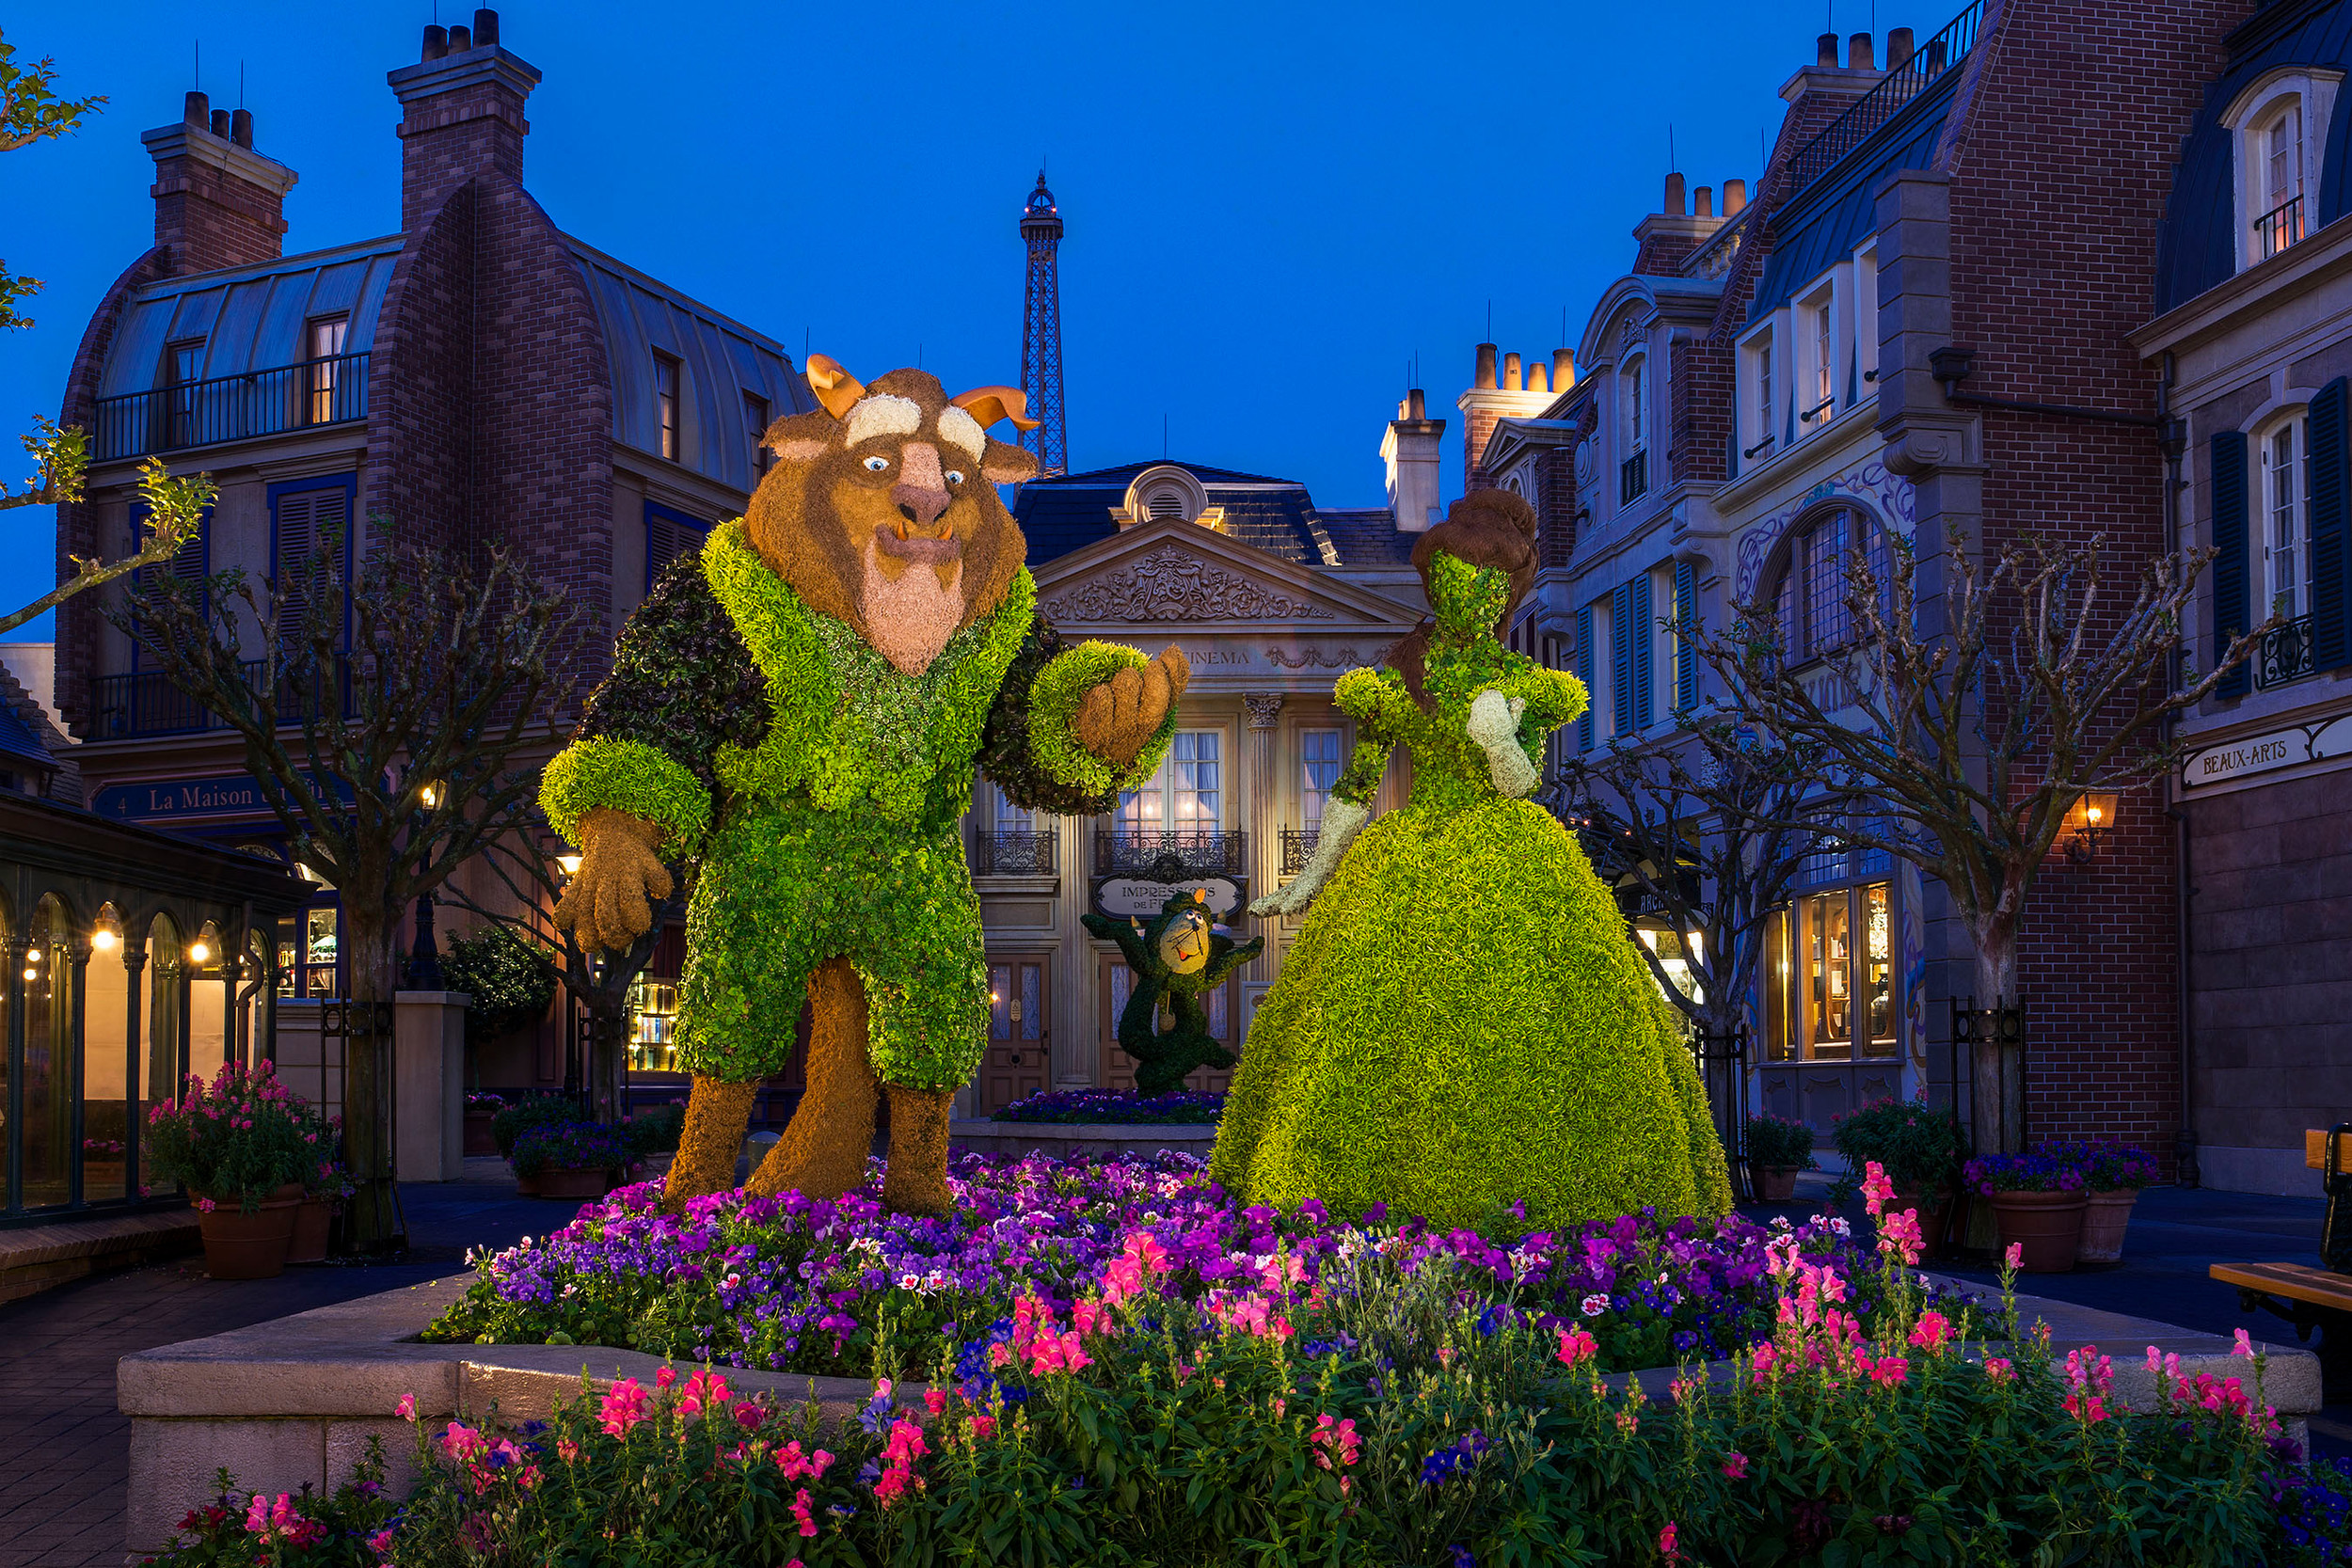 Belle and Beast in topiary form pose by a colorful garden at the France pavilion during the Epcot International Flower & Garden Festival at Walt Disney World Resort in Lake Buena Vista, Fla.  At least 25 different plants, grasses and mosses including palm fiber, ficus and lichen are used to create the character topiaries appearing throughout the park's World Showcase and Future World.   (Matt Stroshane, photographer)